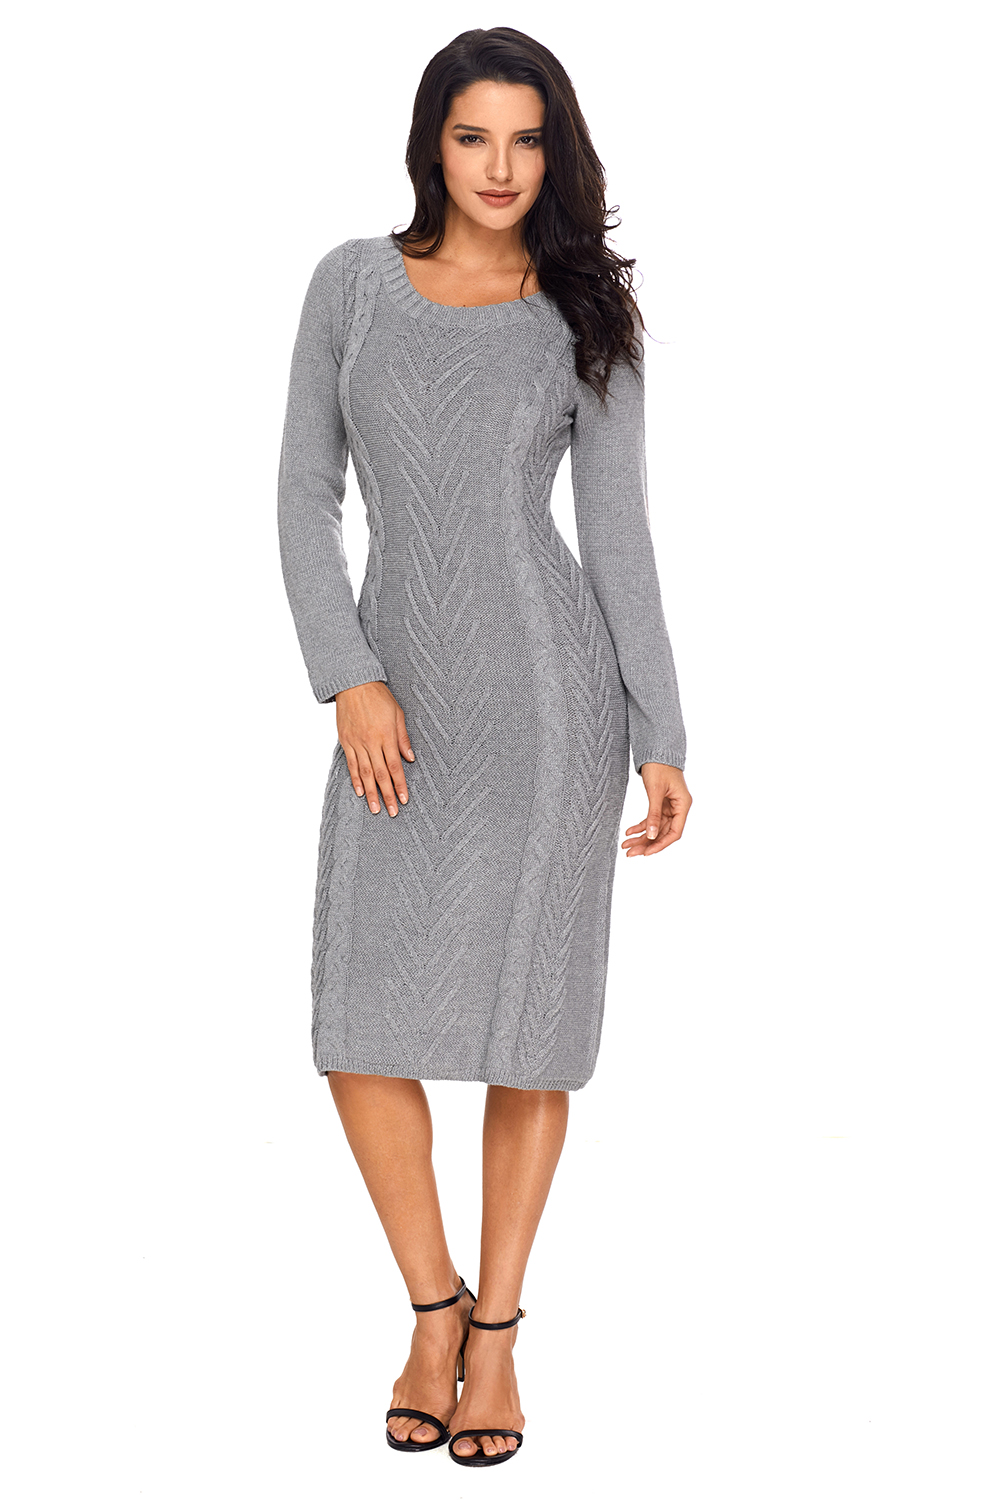 BY27772-11 Gray Women’s Hand Knitted Sweater Dress